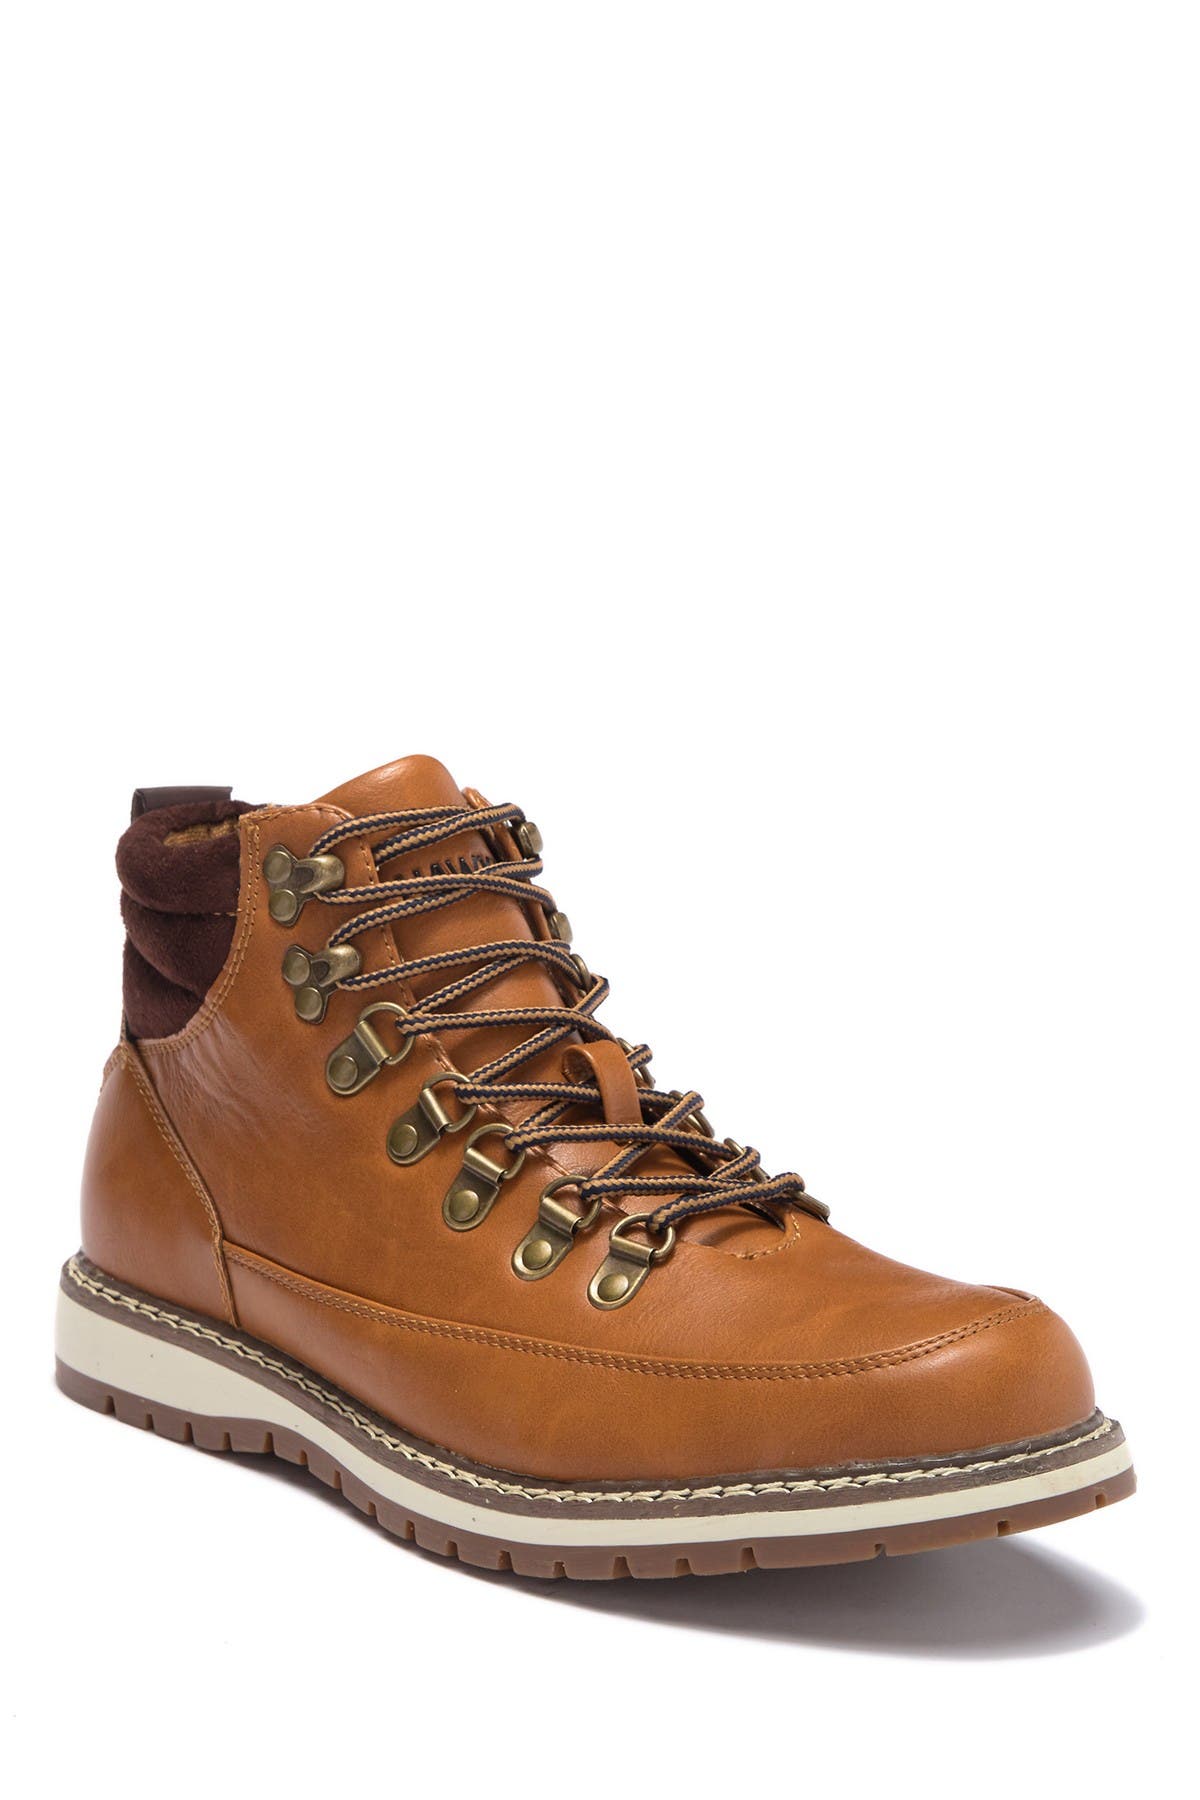 Hawke \u0026 Co. | Norway Lace-Up Boot 